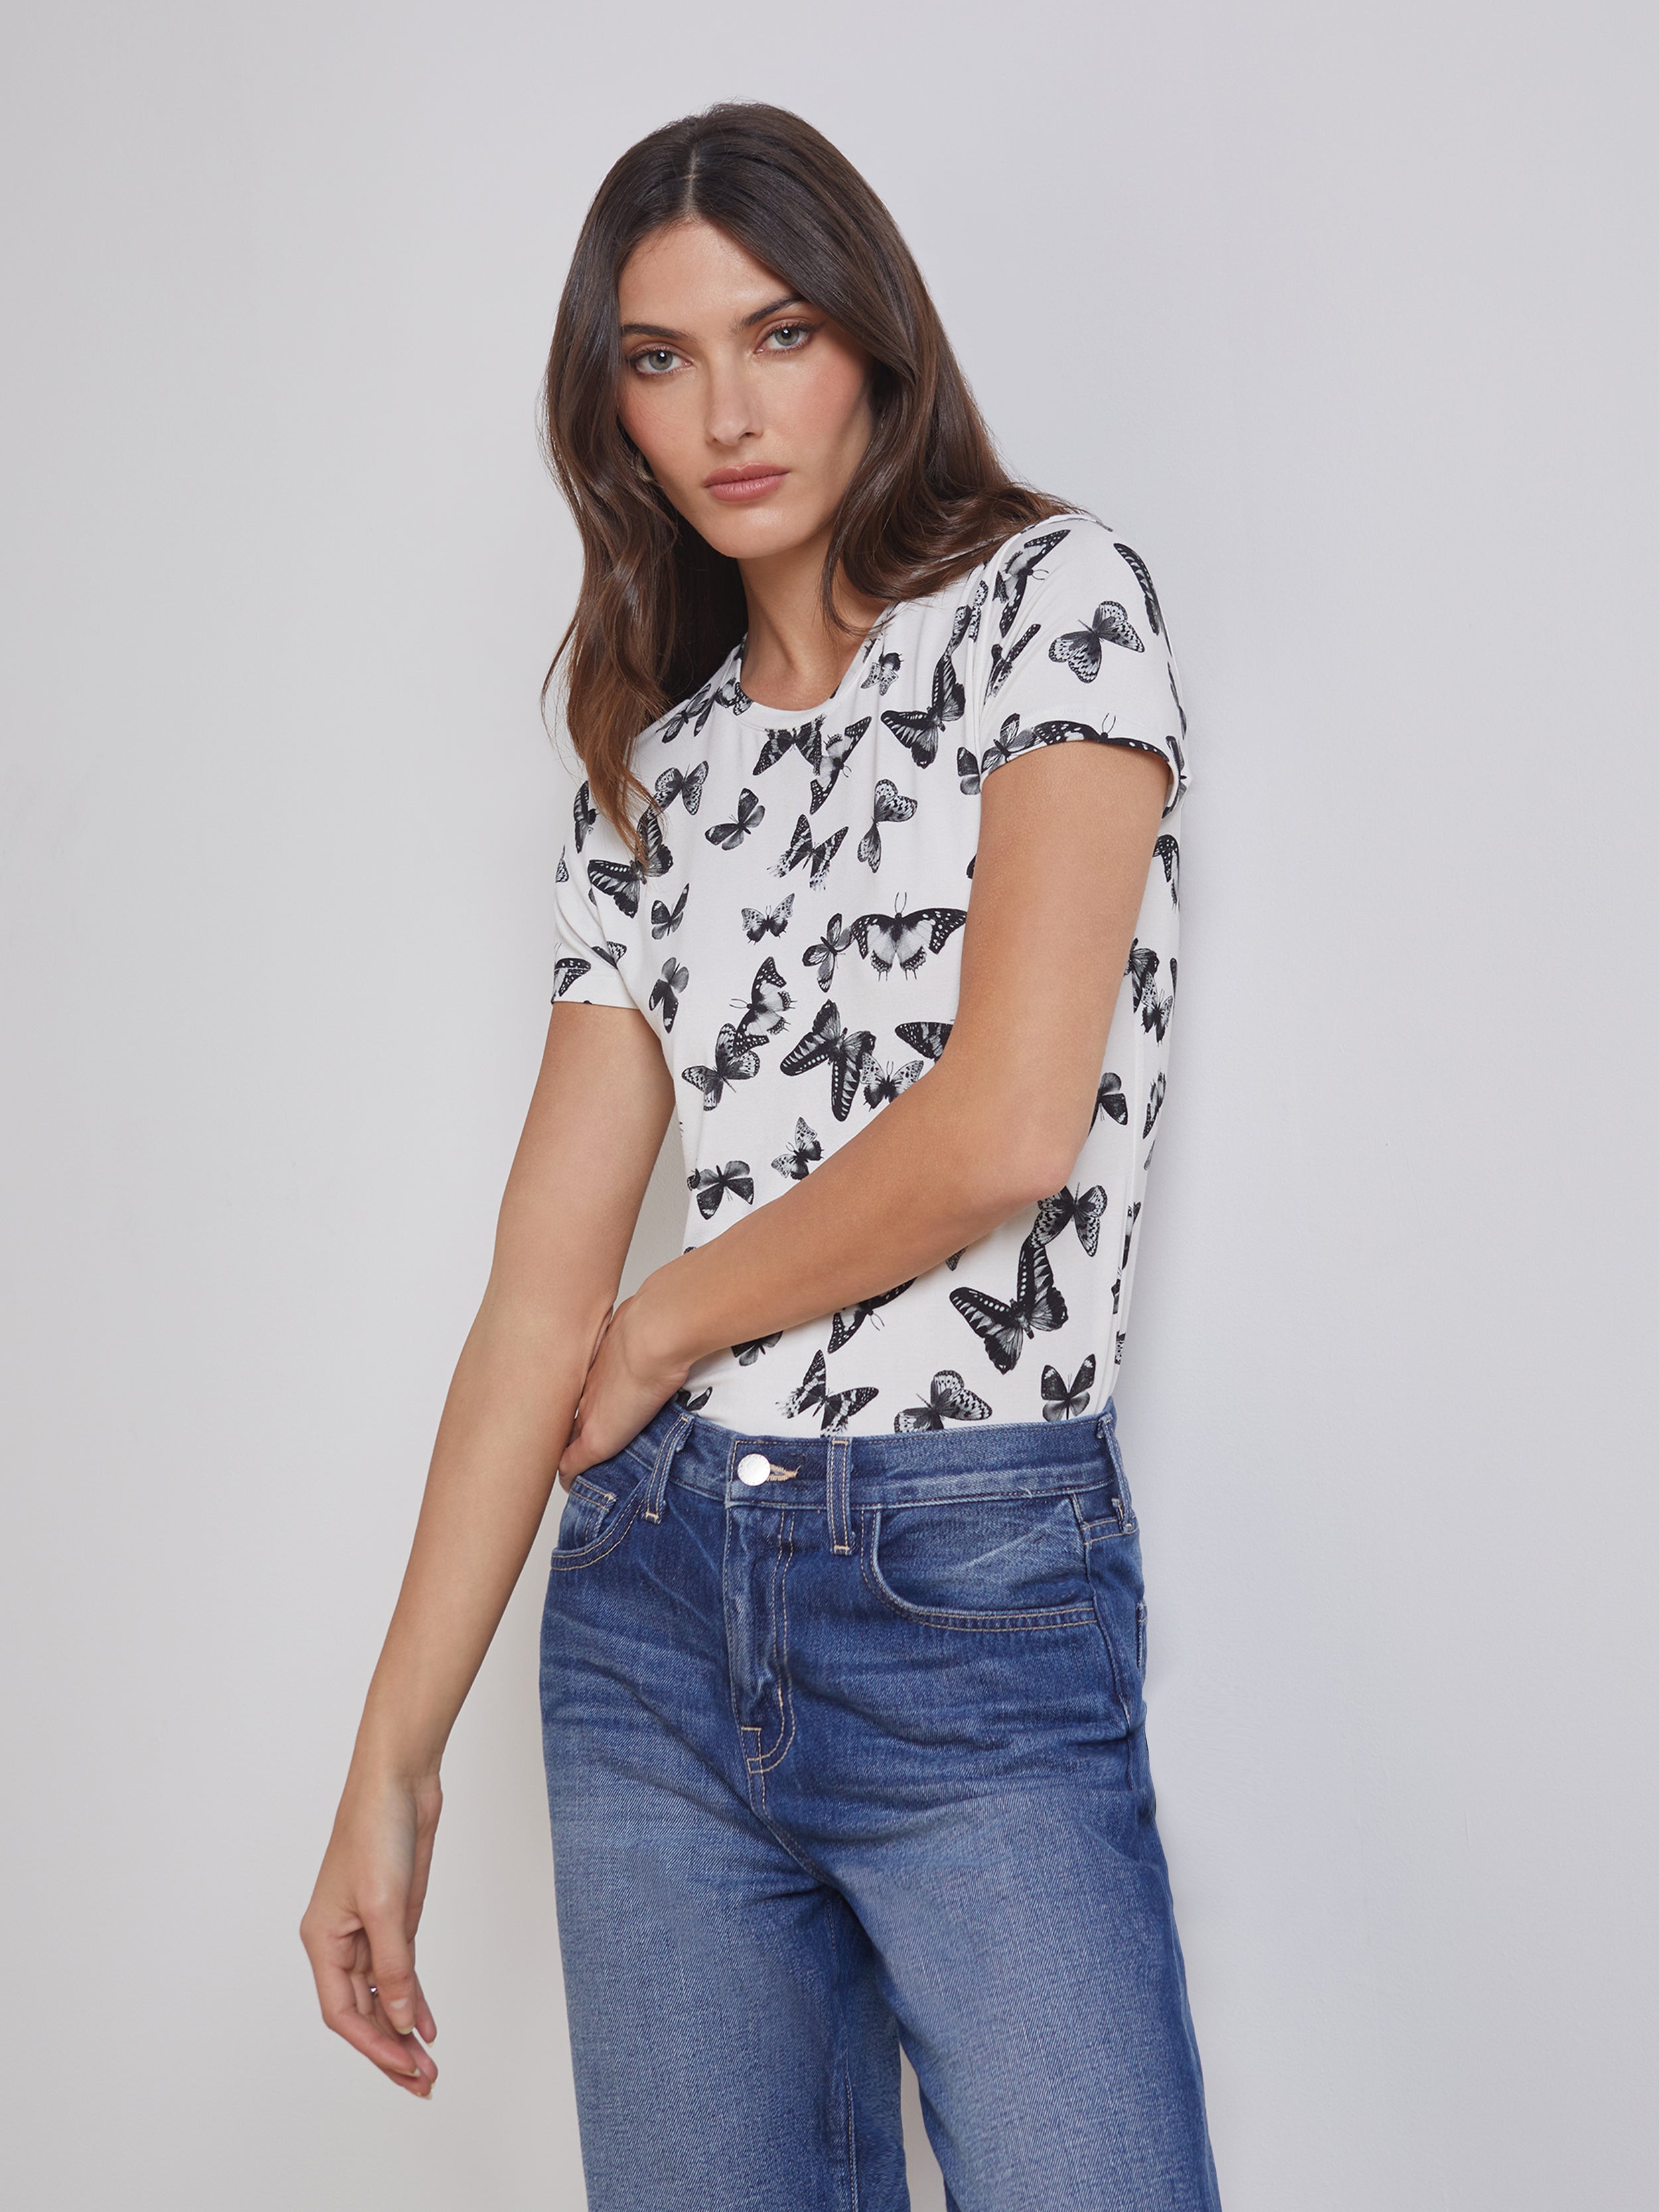 L'AGENCE Ressi Slim-Fit Tee in Black/White Small Butterfly